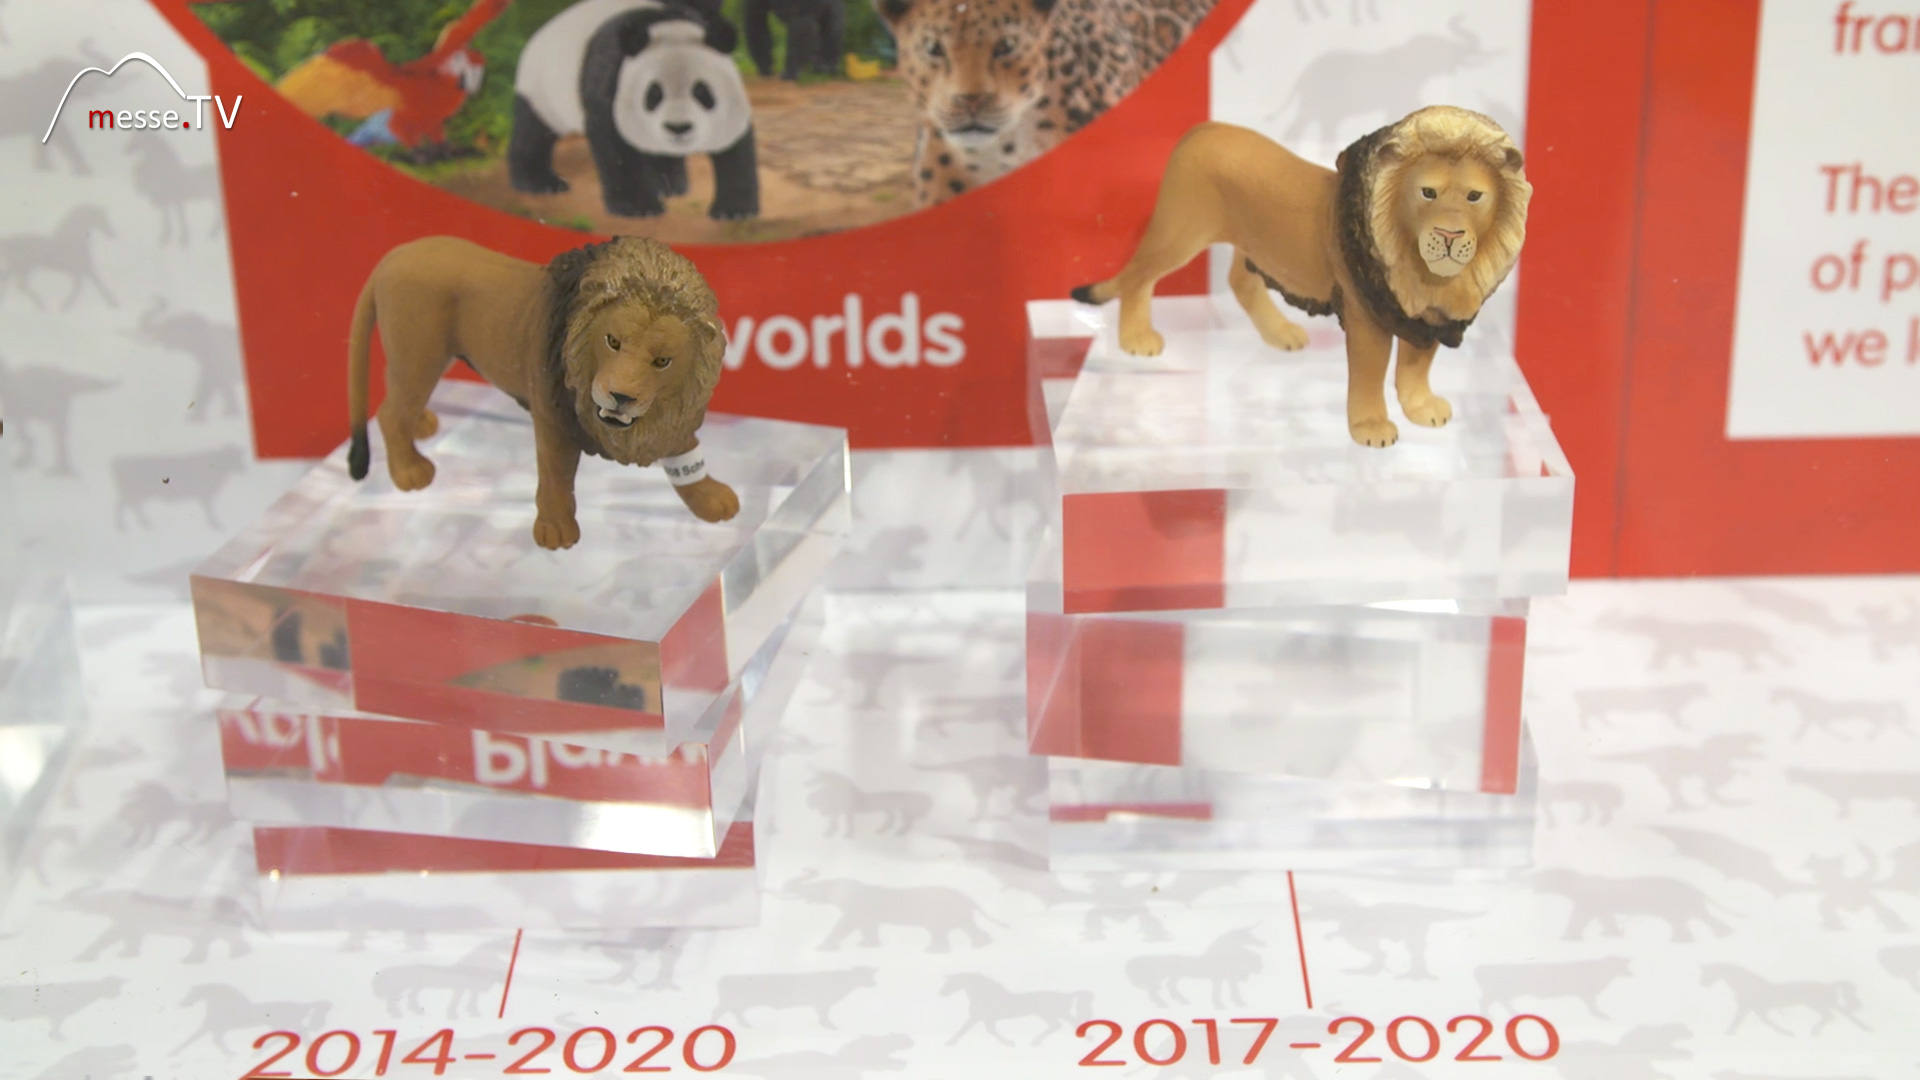 Schleich authentic play figures with tradition